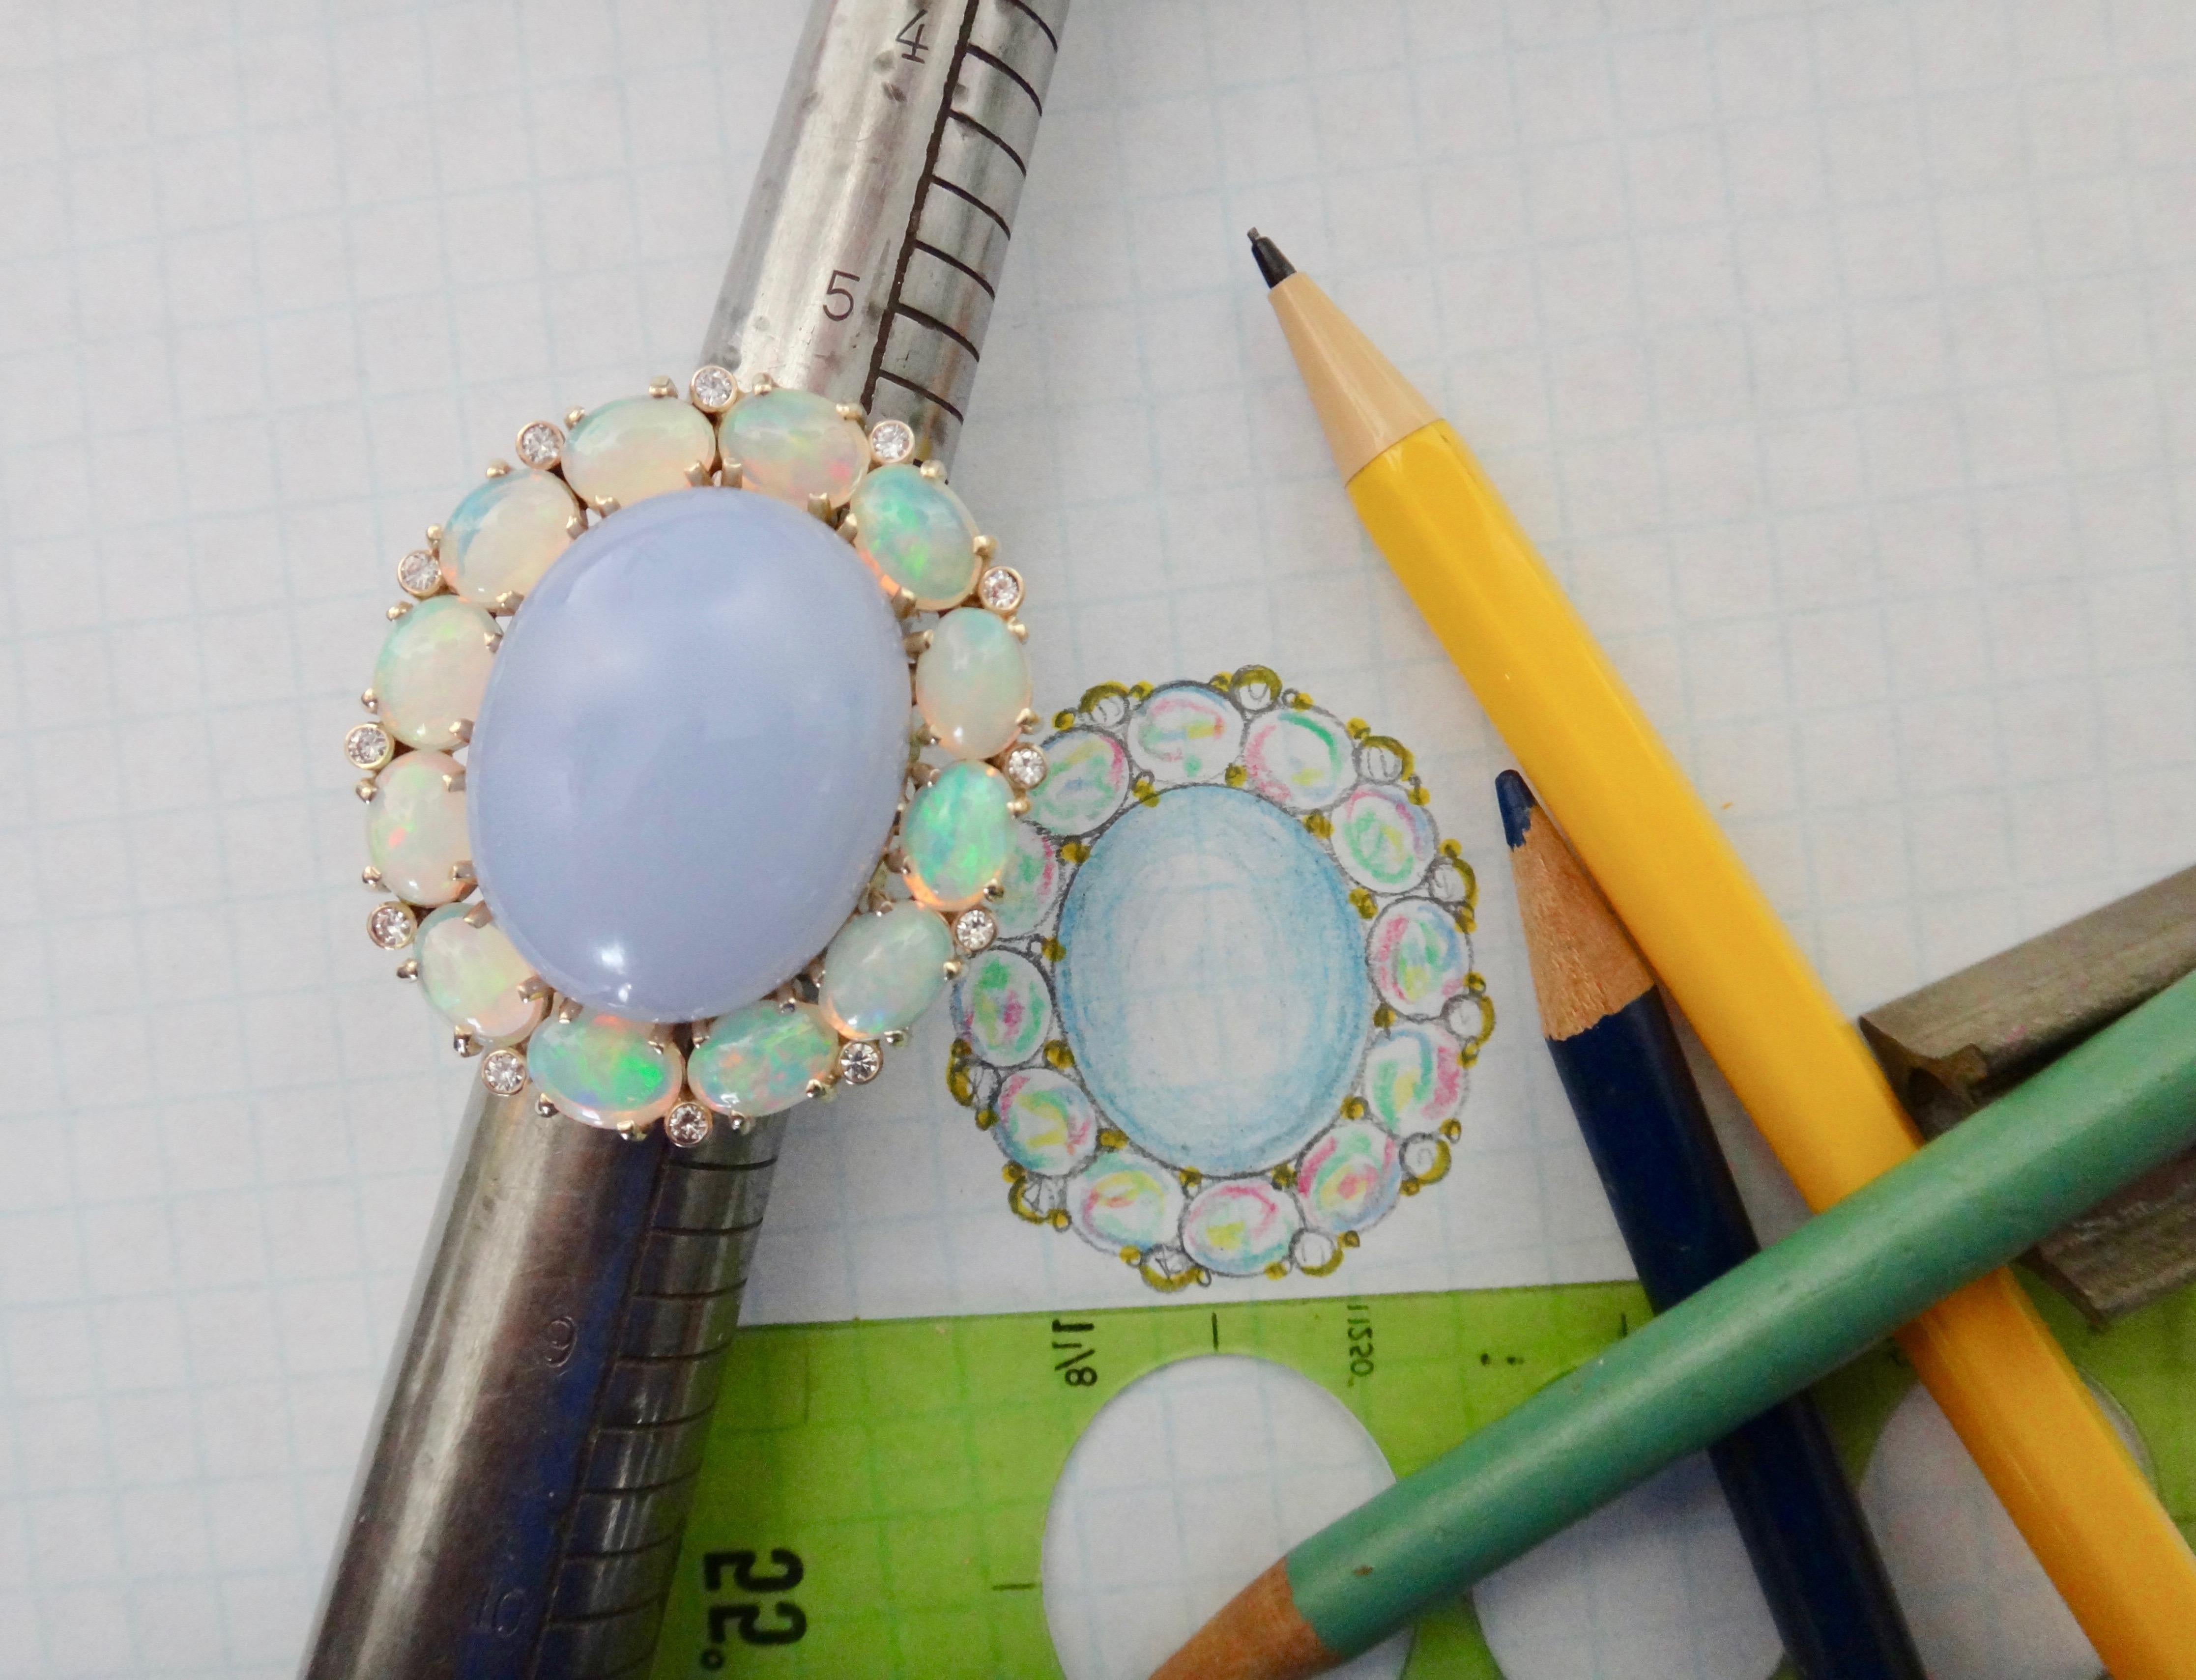 A delicately colored blue chalcedony with a delicious polish is the centerpiece of this dinner ring.  The cabochon is surrounded by 12 Ethiopian opals with a full range of colors including blue, green, pink and orange.  Spaced between the oval